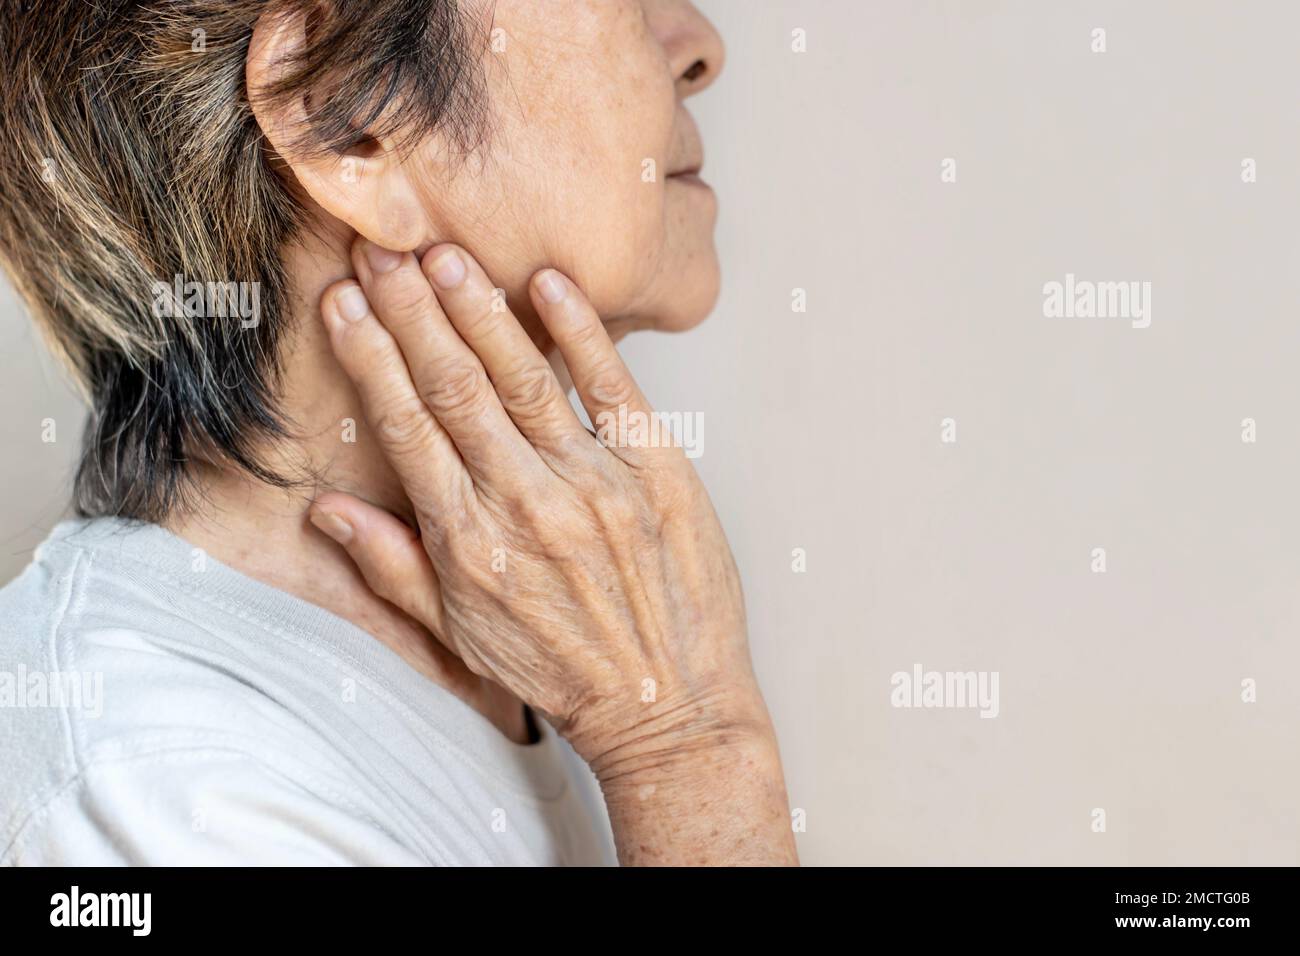 Pain at the jaw of Asian female patient. She feels wisdom toothache and lymph node pain. Stock Photo